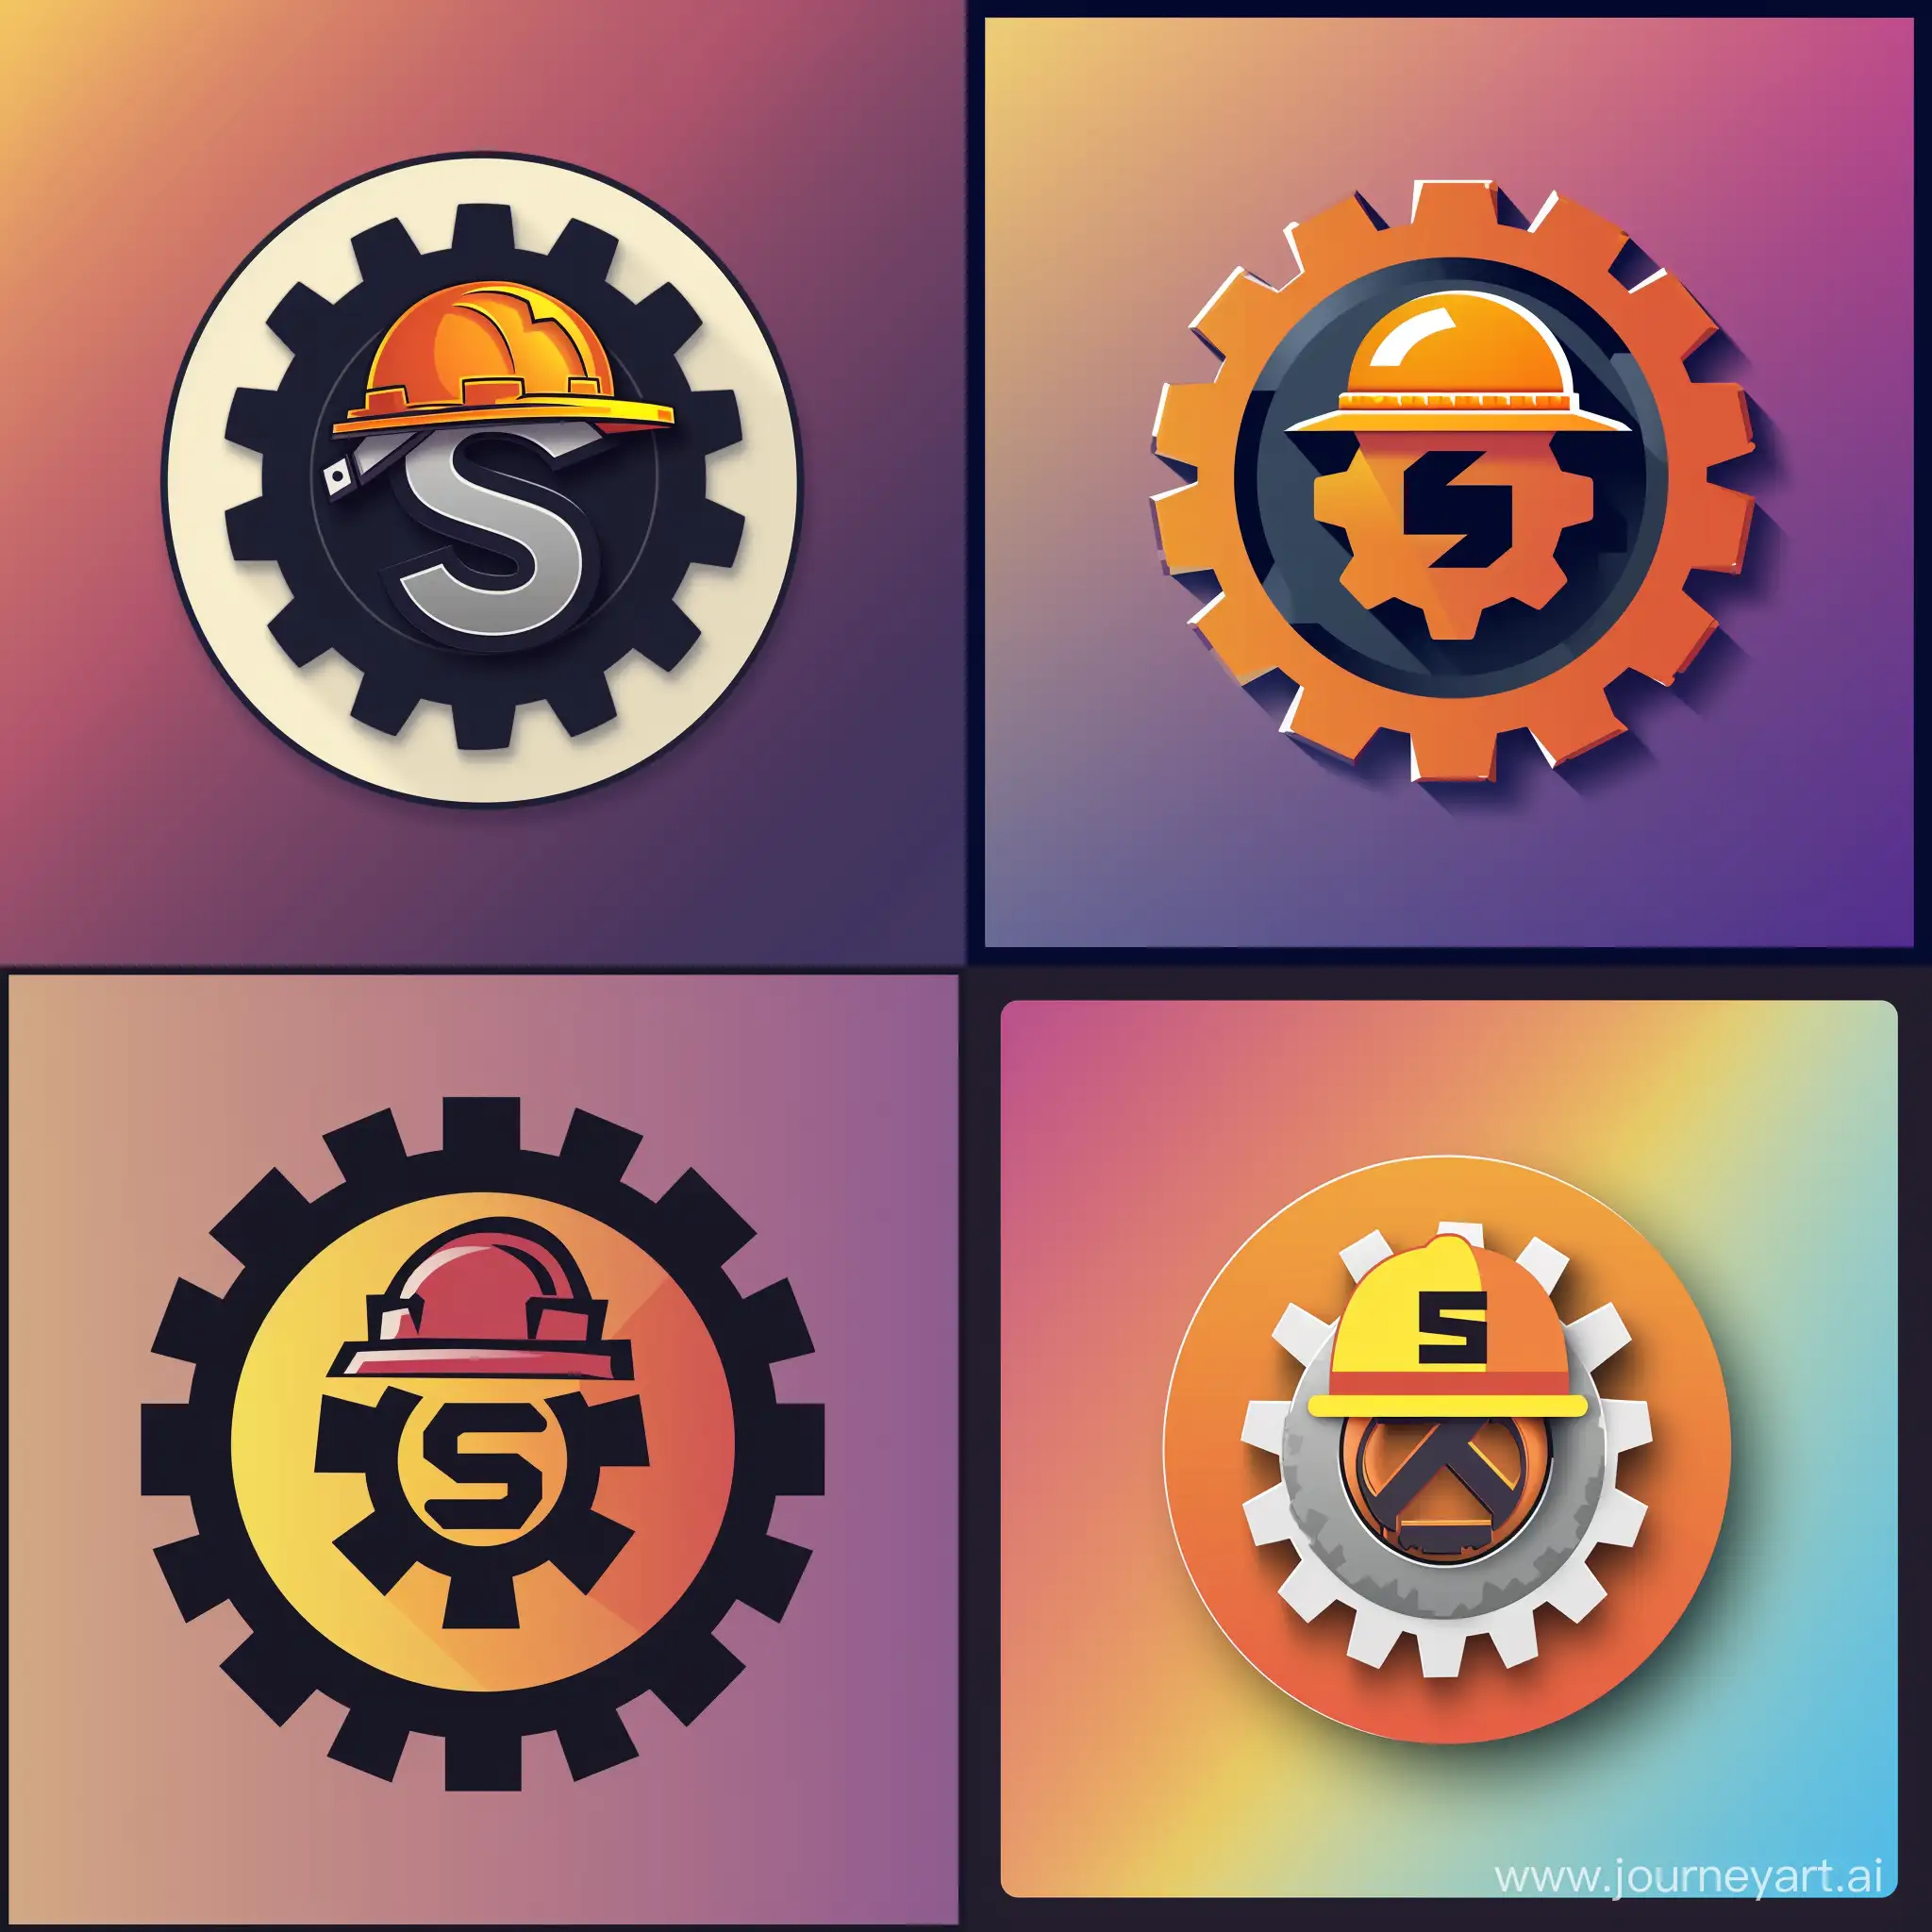 Logo, art. In the centre is a gear with a construction helmet on it. The headboard of the helmet shows the letter s. Theme of minecraft logo. The background is gradient color 